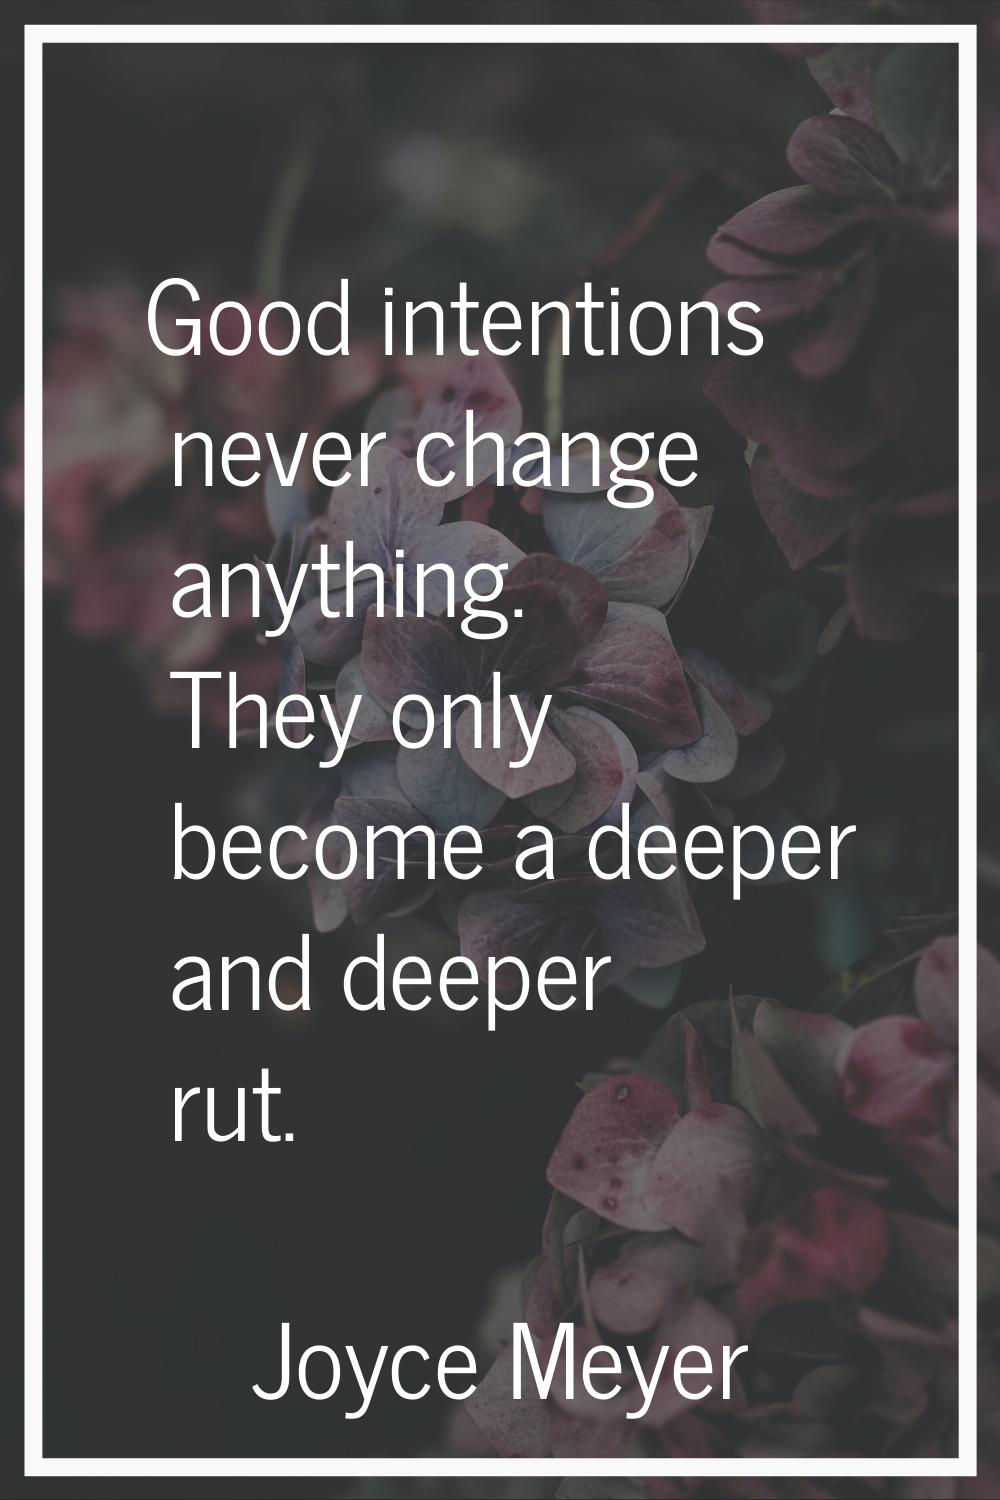 Good intentions never change anything. They only become a deeper and deeper rut.